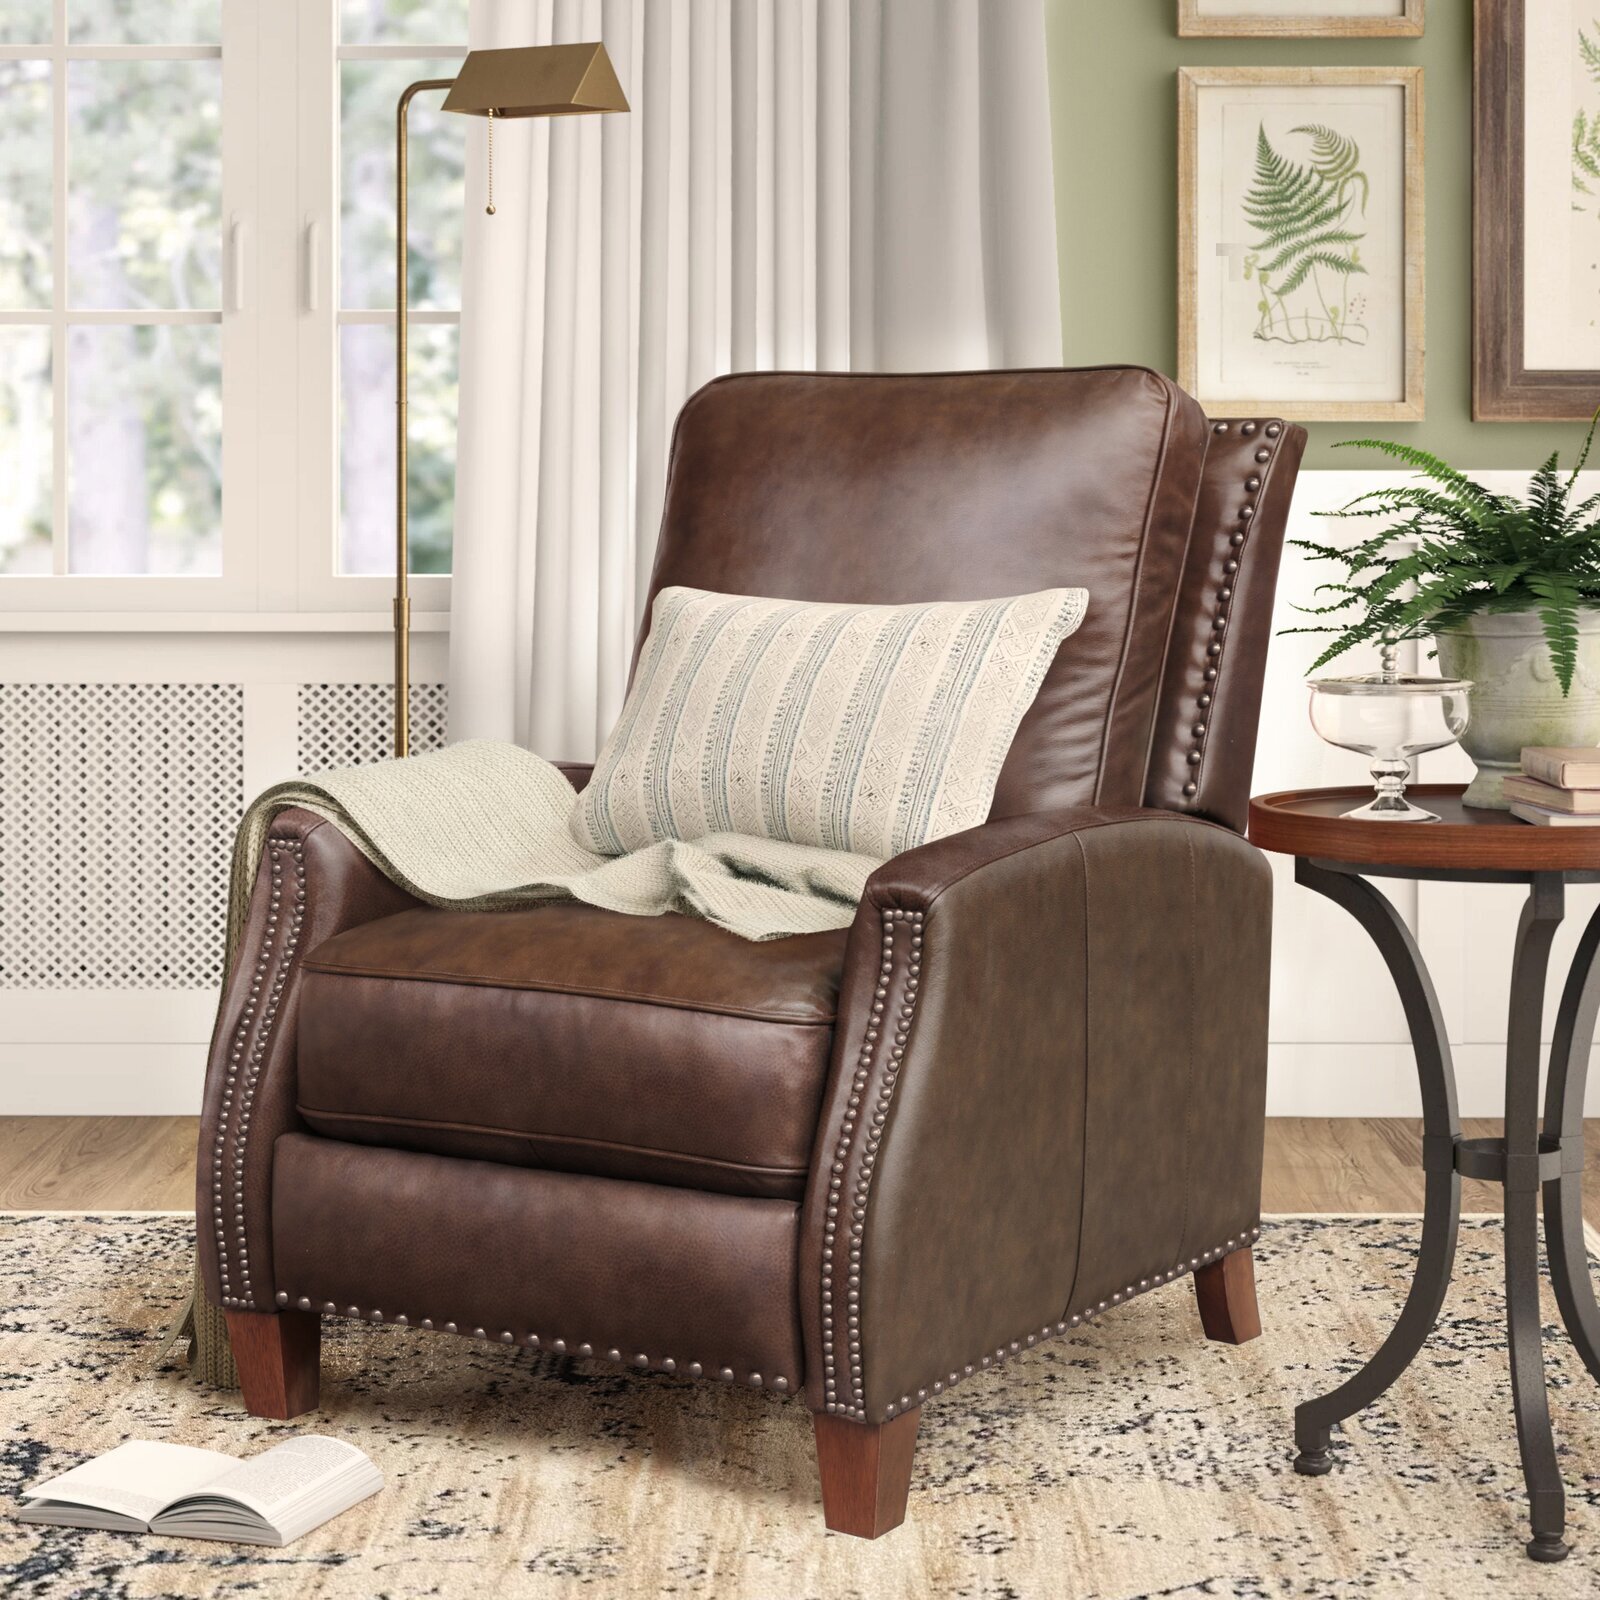 Transitional Style Leather Mission Style Recliner